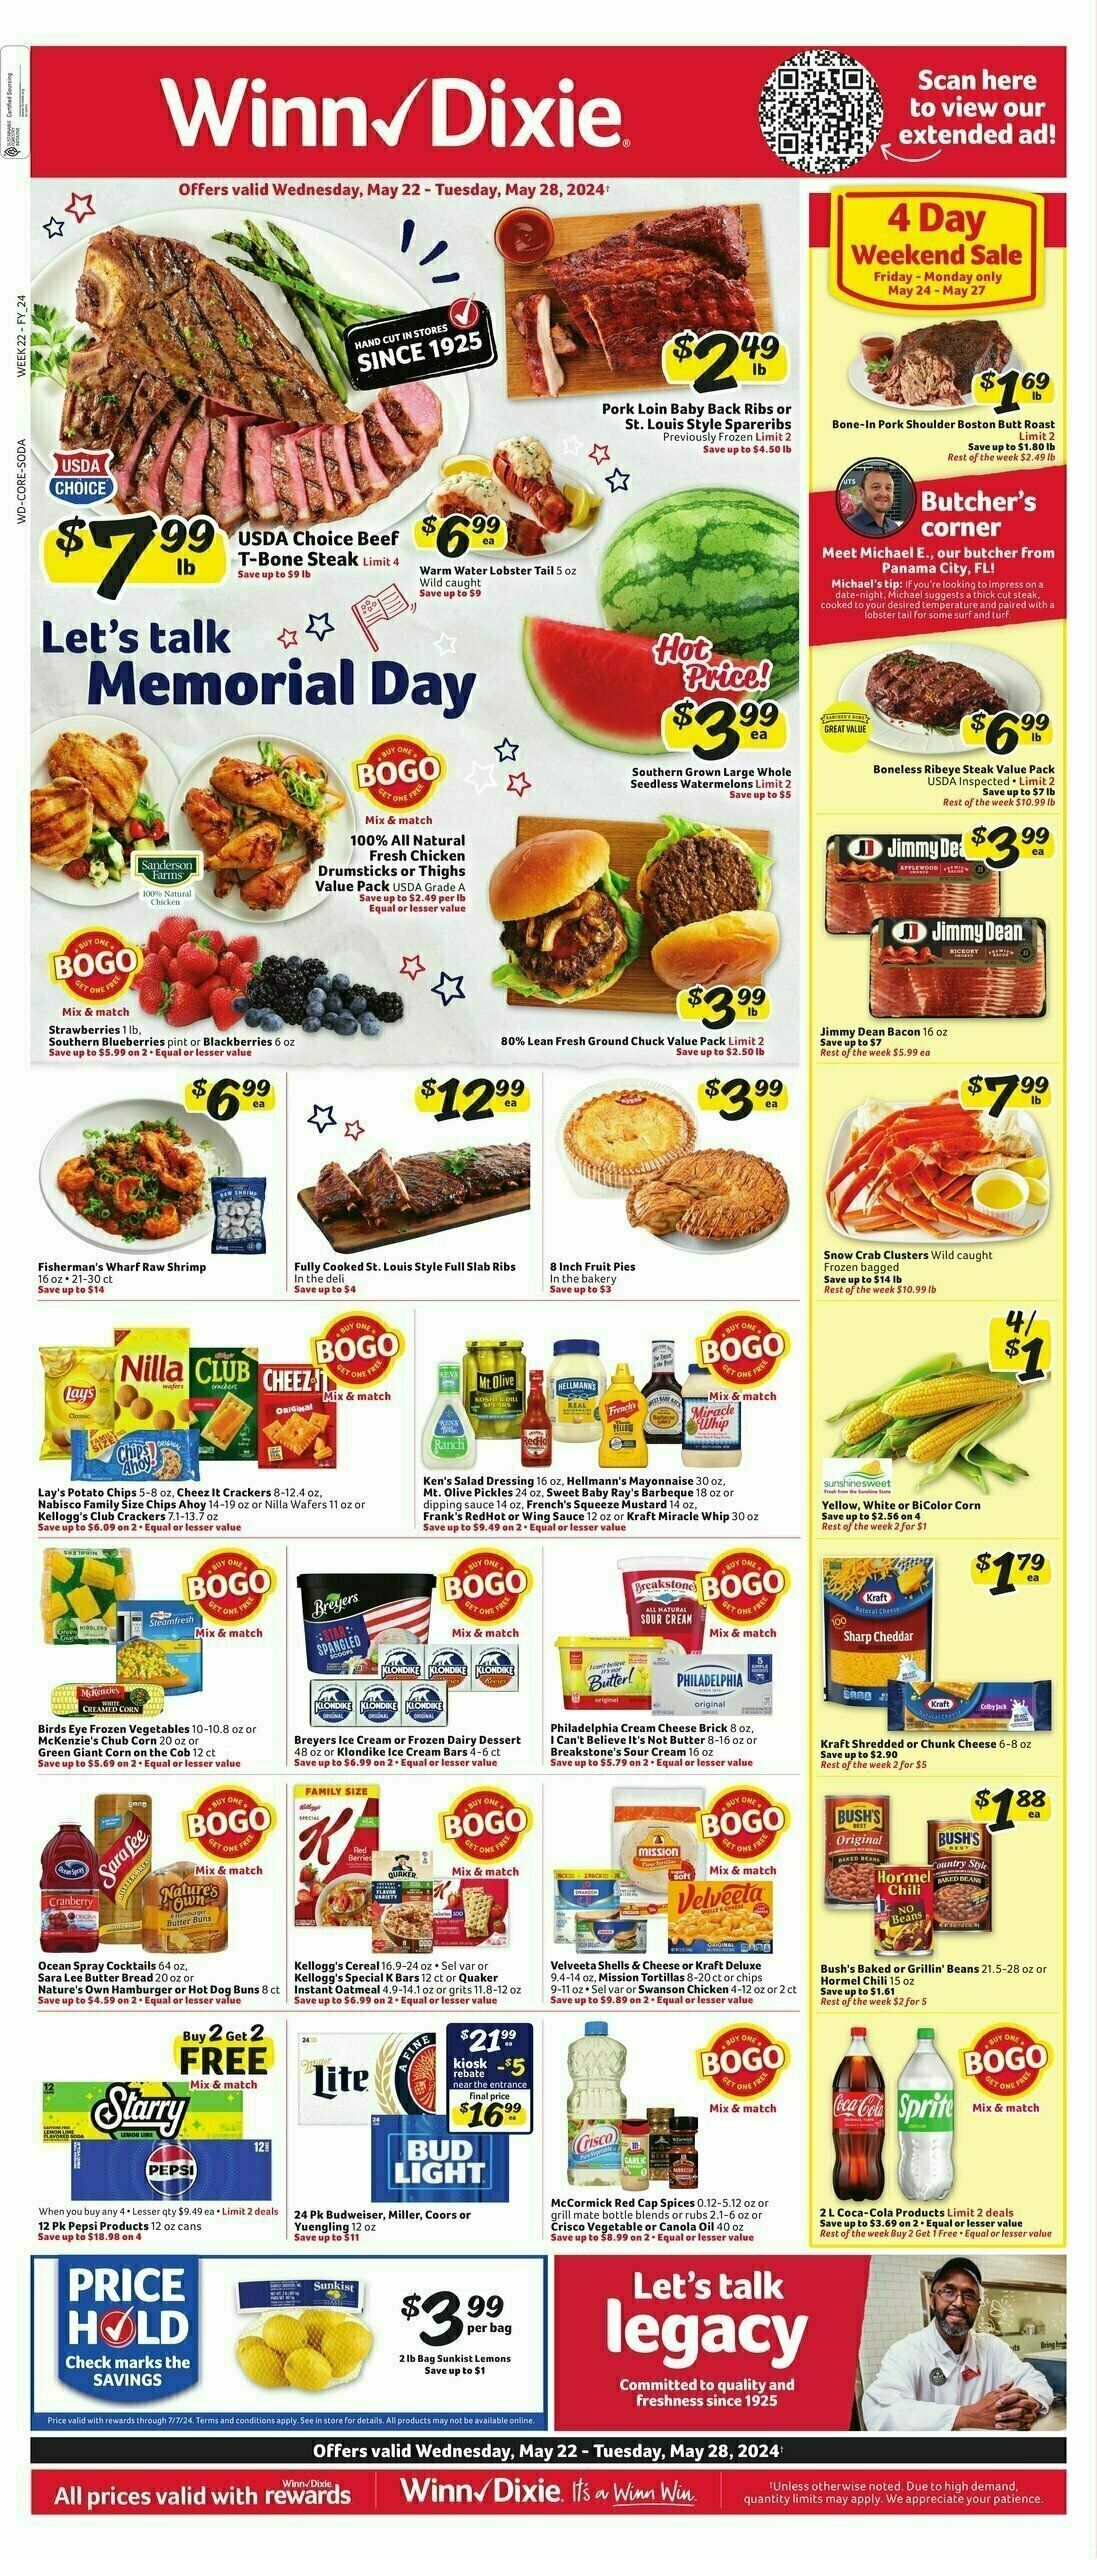 Winn-Dixie Weekly Ad from May 22